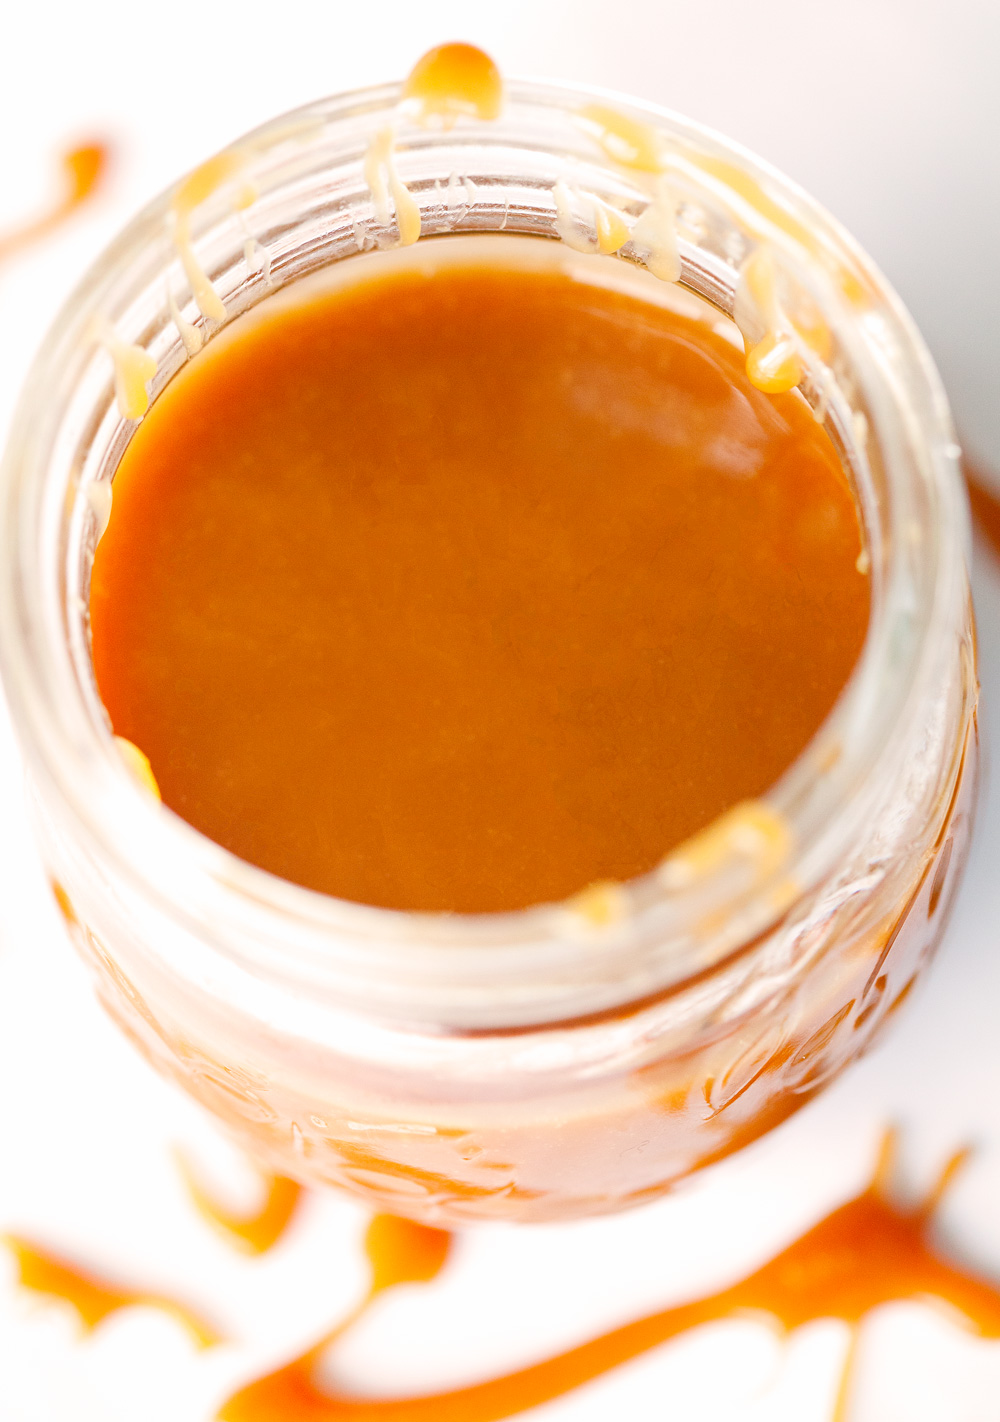 Homemade Salted Caramel Sauce by Deliciously Yum!